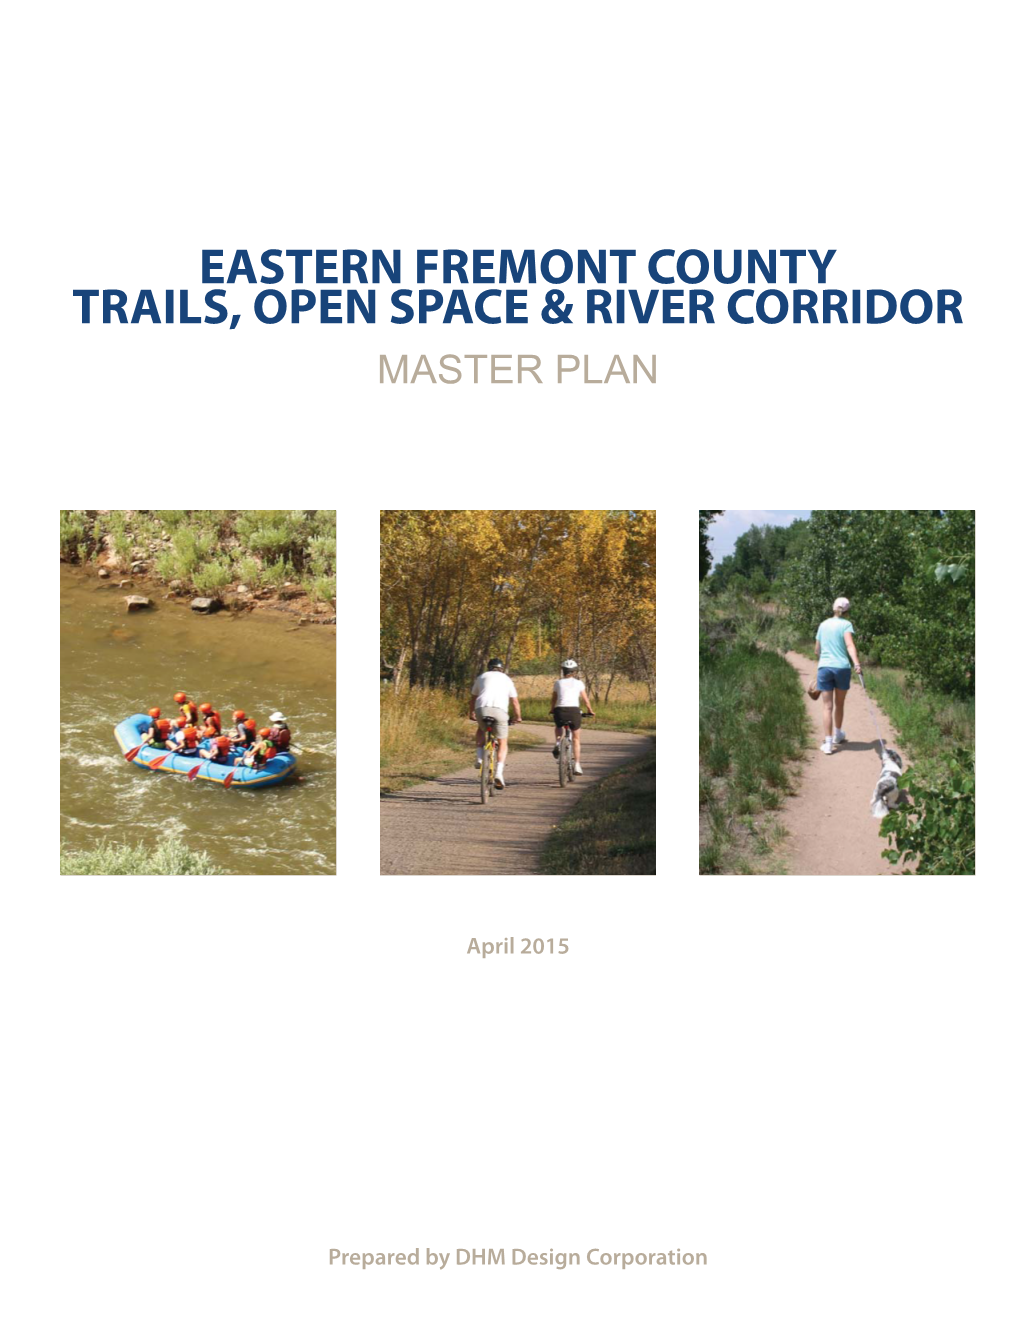 Eastern Fremont County Trails, Open Space & River Corridor Master Plan